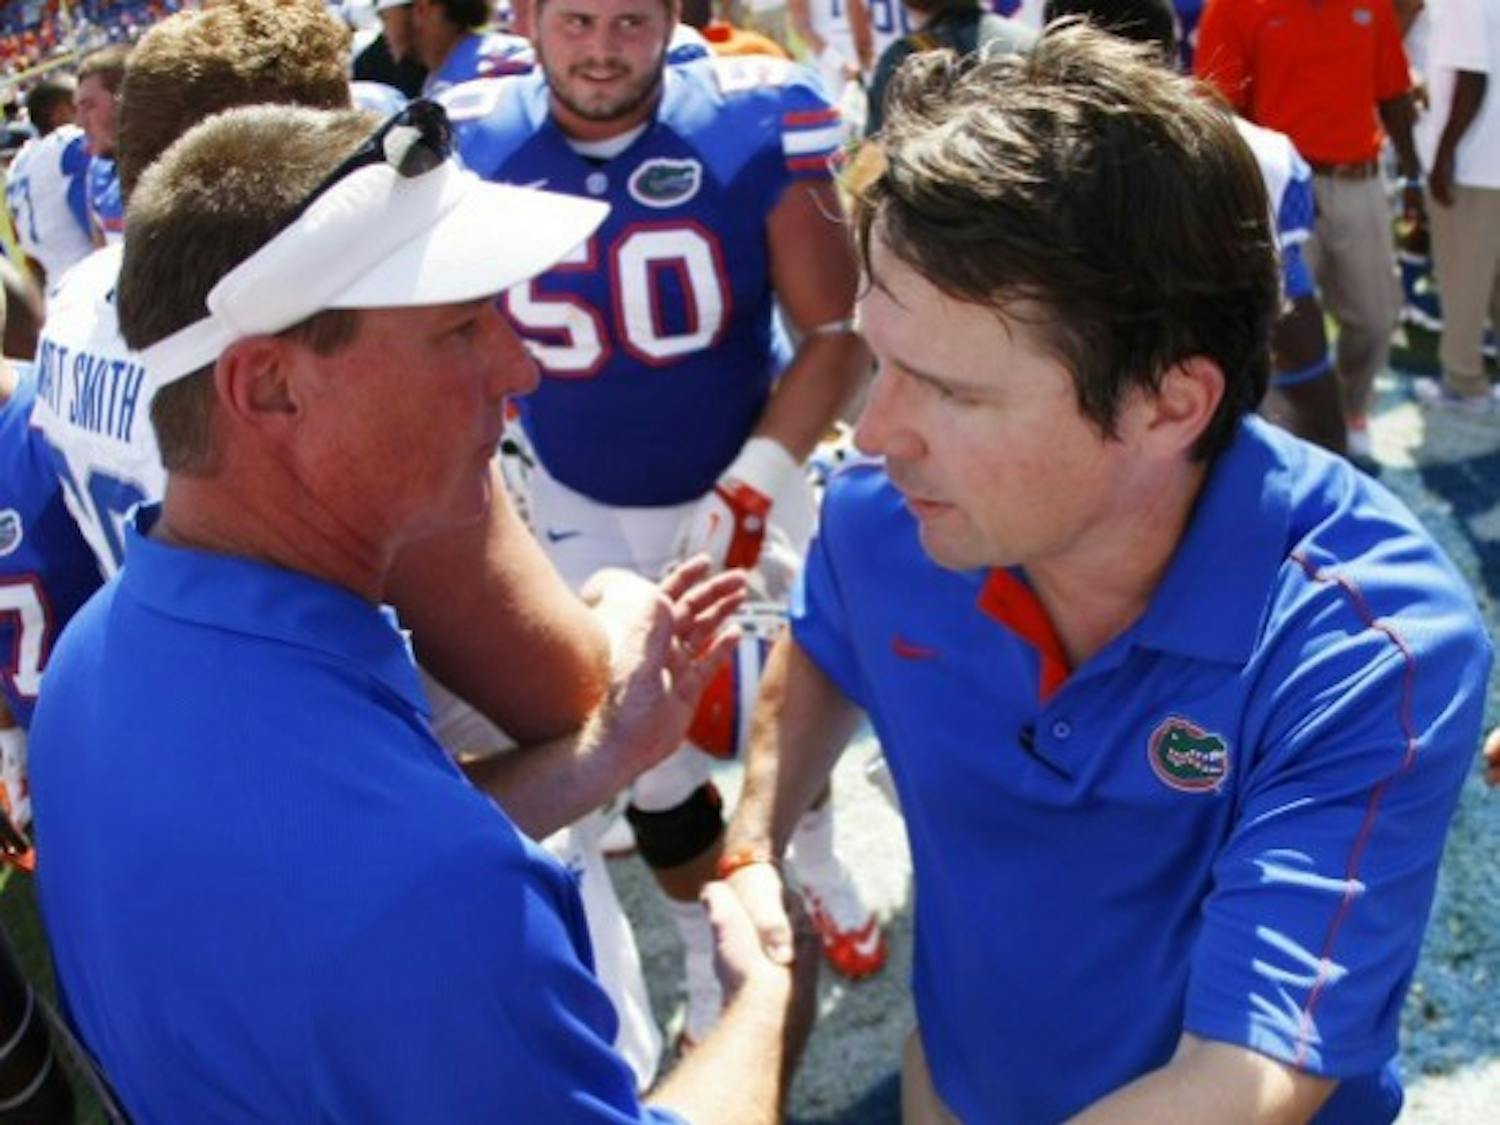 Coach Will Muschamp and Kentucky offensive coordinator Randy Sanders shake hands after Florida’s 38-0 win on Sept. 22 at Ben Hill Griffin Stadium. The Swamp will host an array of football recruits when No. 10 Florida takes on No. 4 LSU.